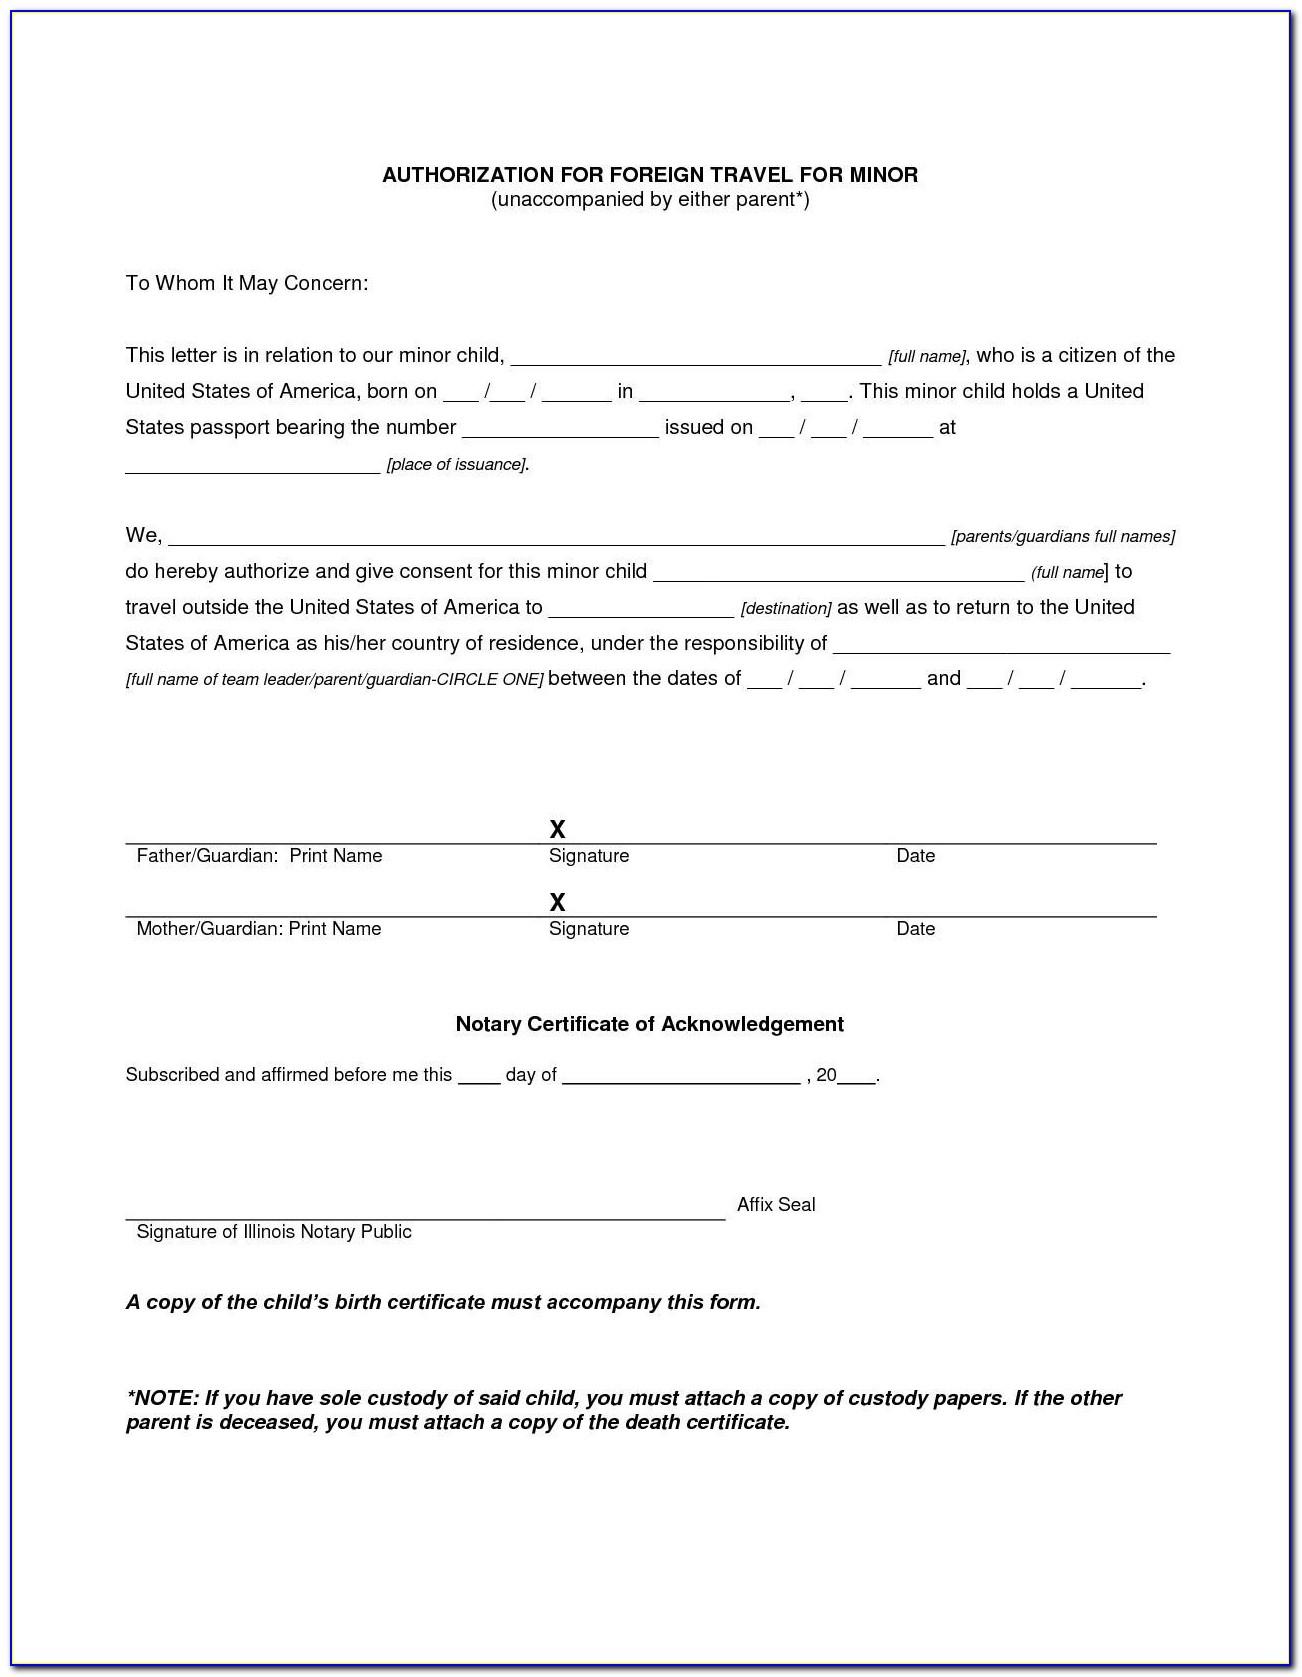 Share Subscription Agreement Template Canada